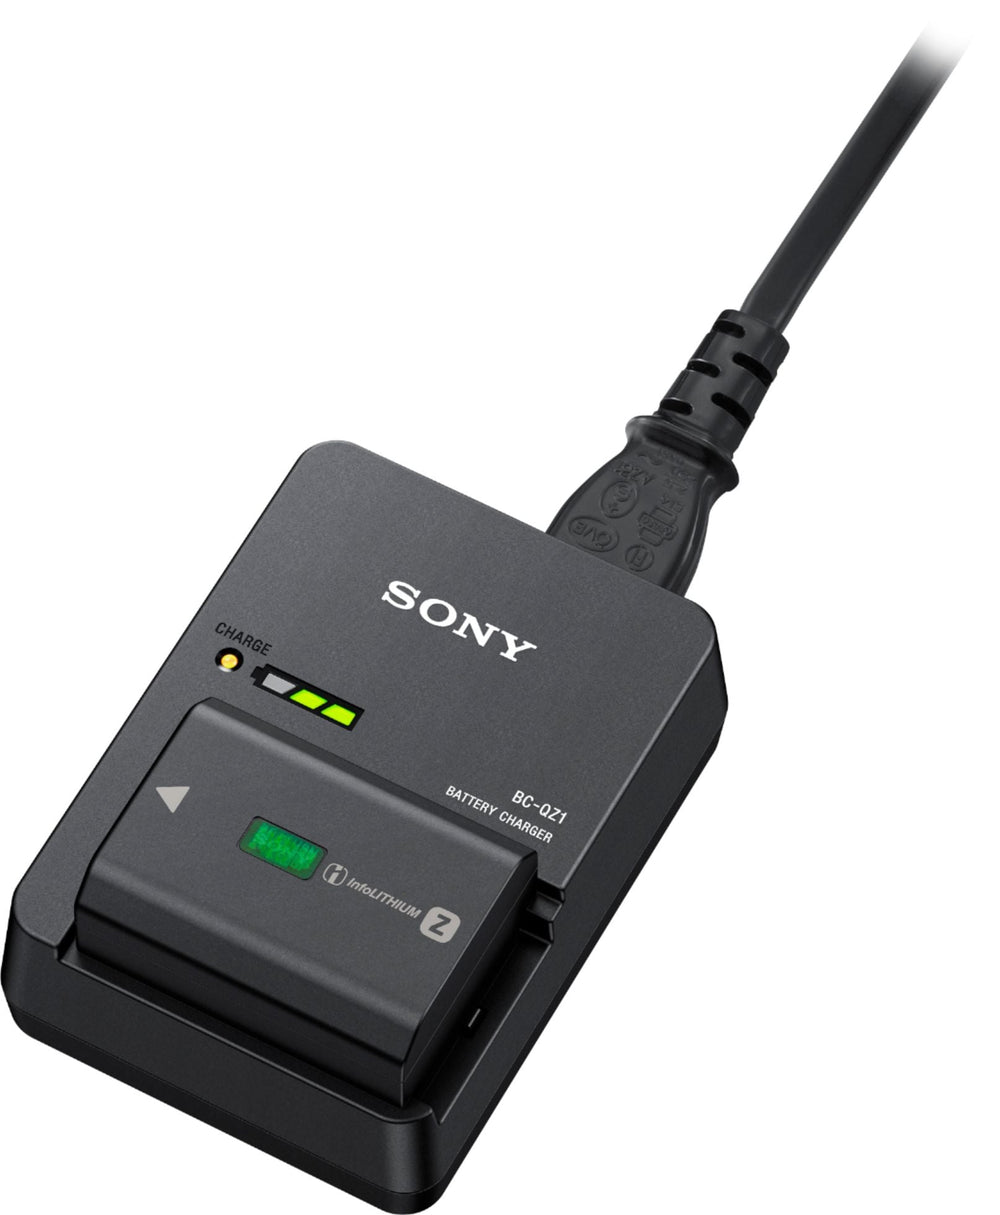 Sony - Battery Charger - Black_1